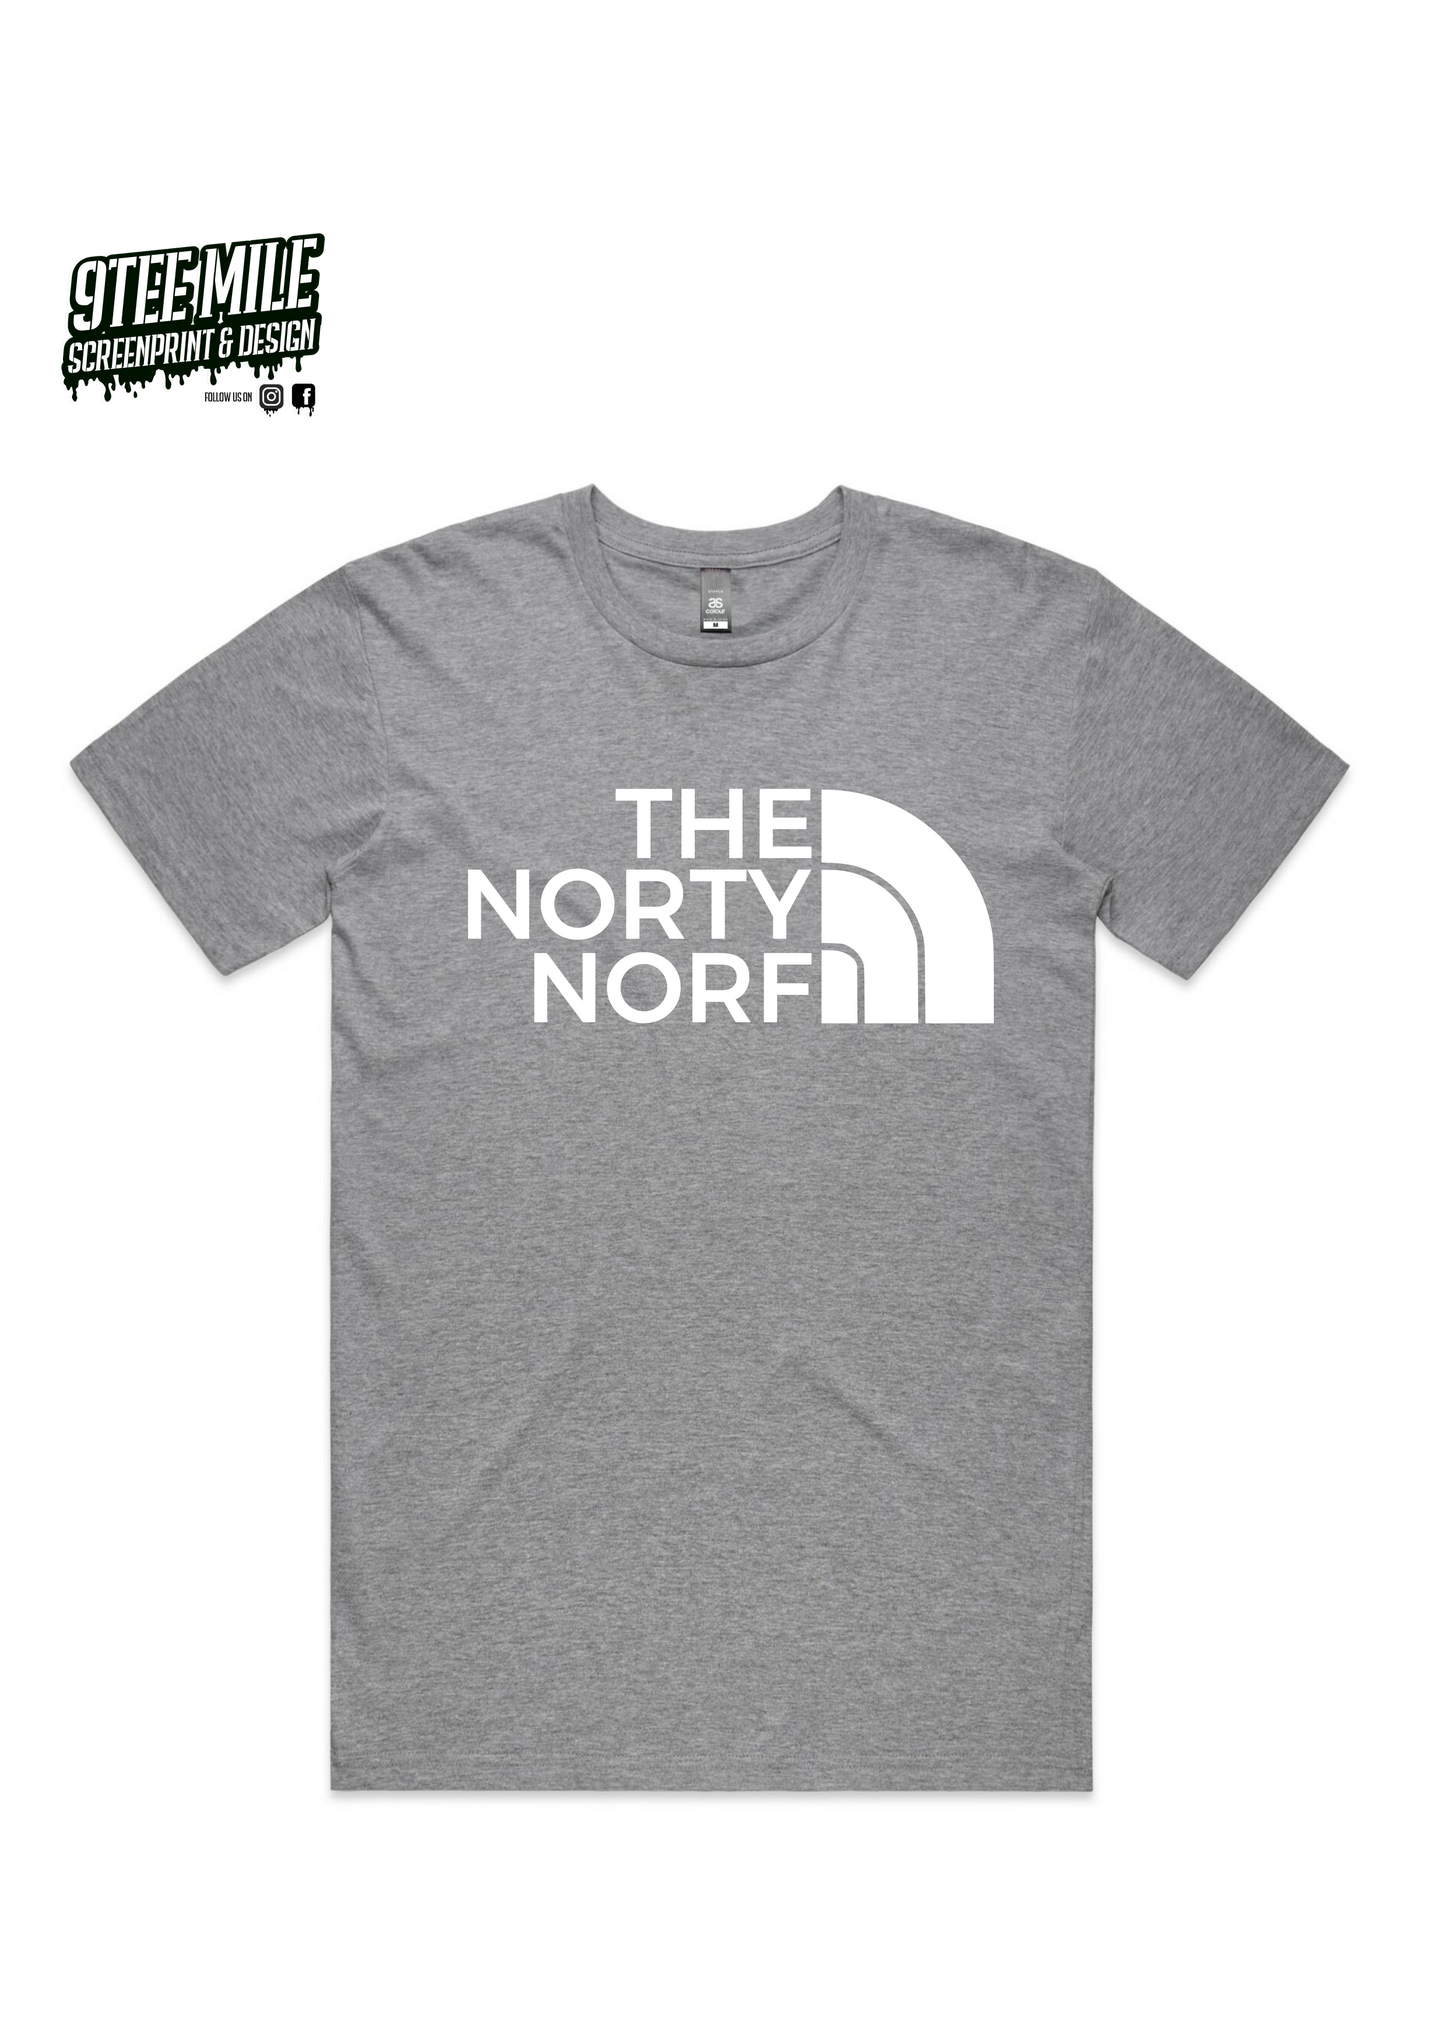 THE NORTY NORF TEES